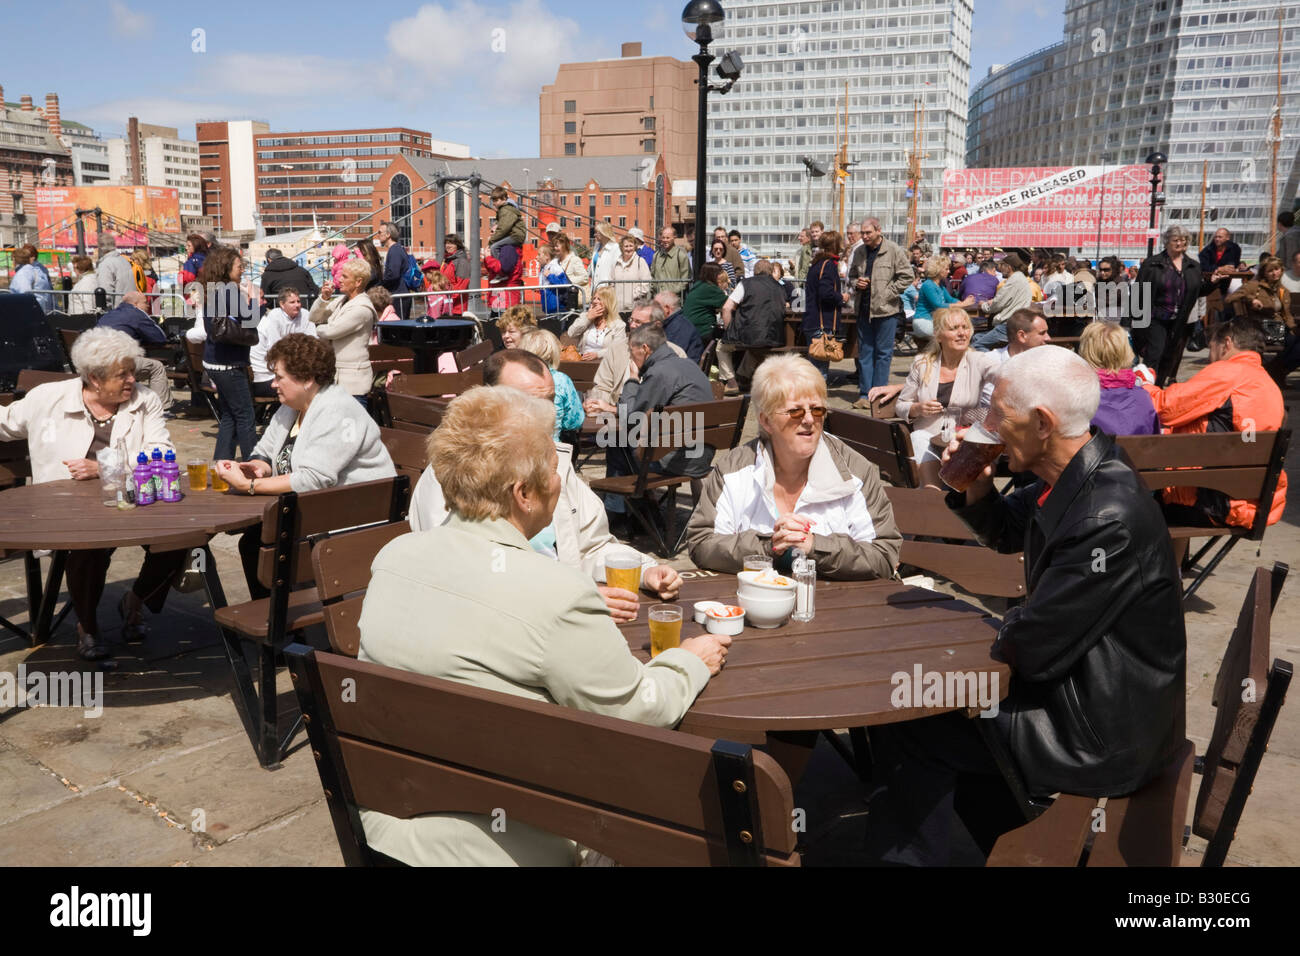 The Pumphouse pub with English people sitting drinking at outdoor tables in a busy beer garden in summer. Liverpool Merseyside England UK Britain Stock Photo